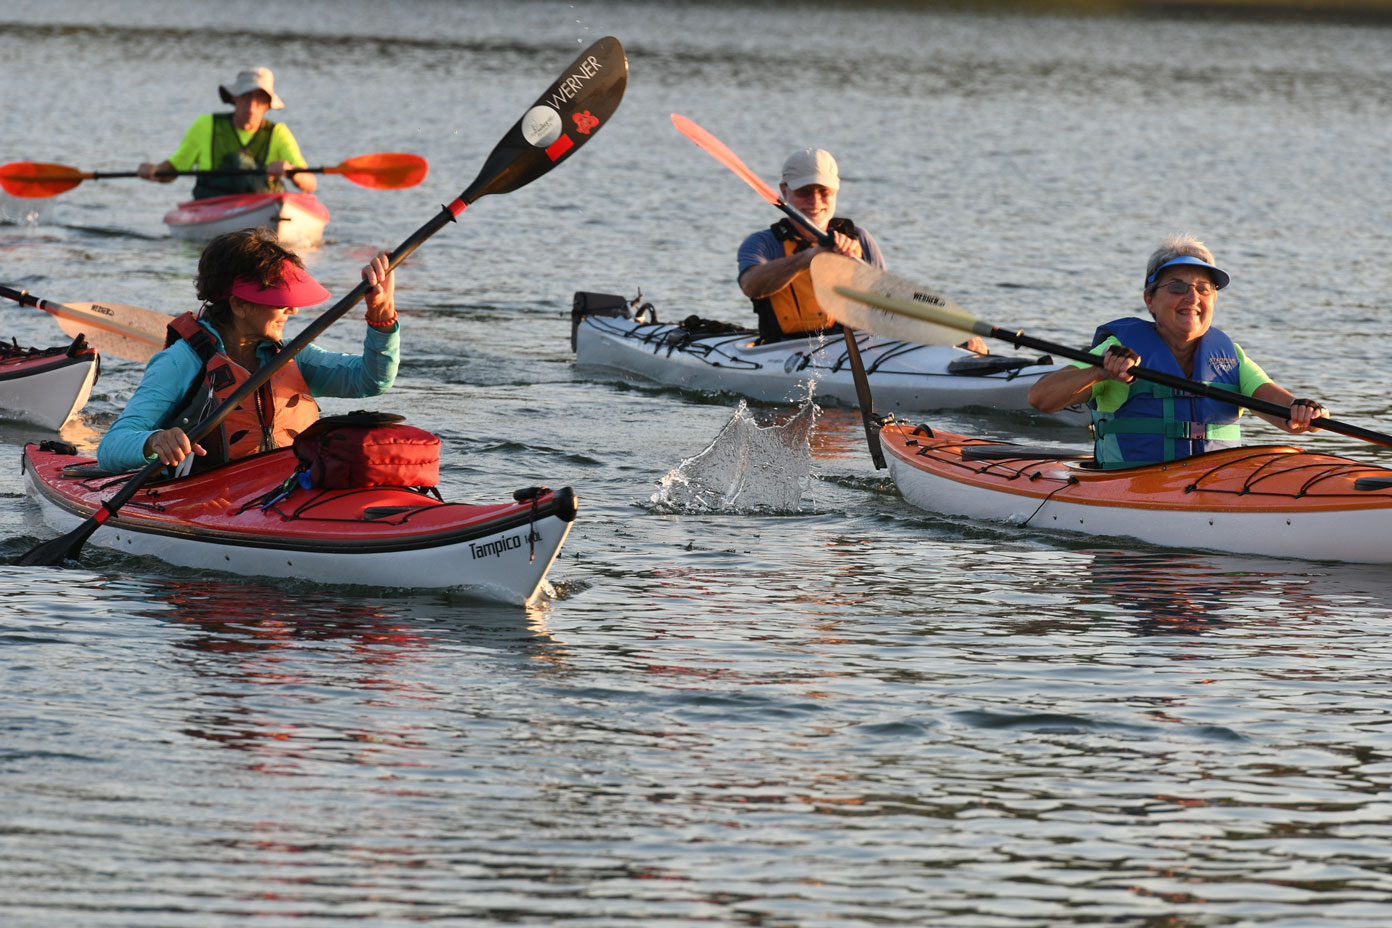 Villagers enjoying kayaking as members of one of the many offered lifestyle clubs in the community.